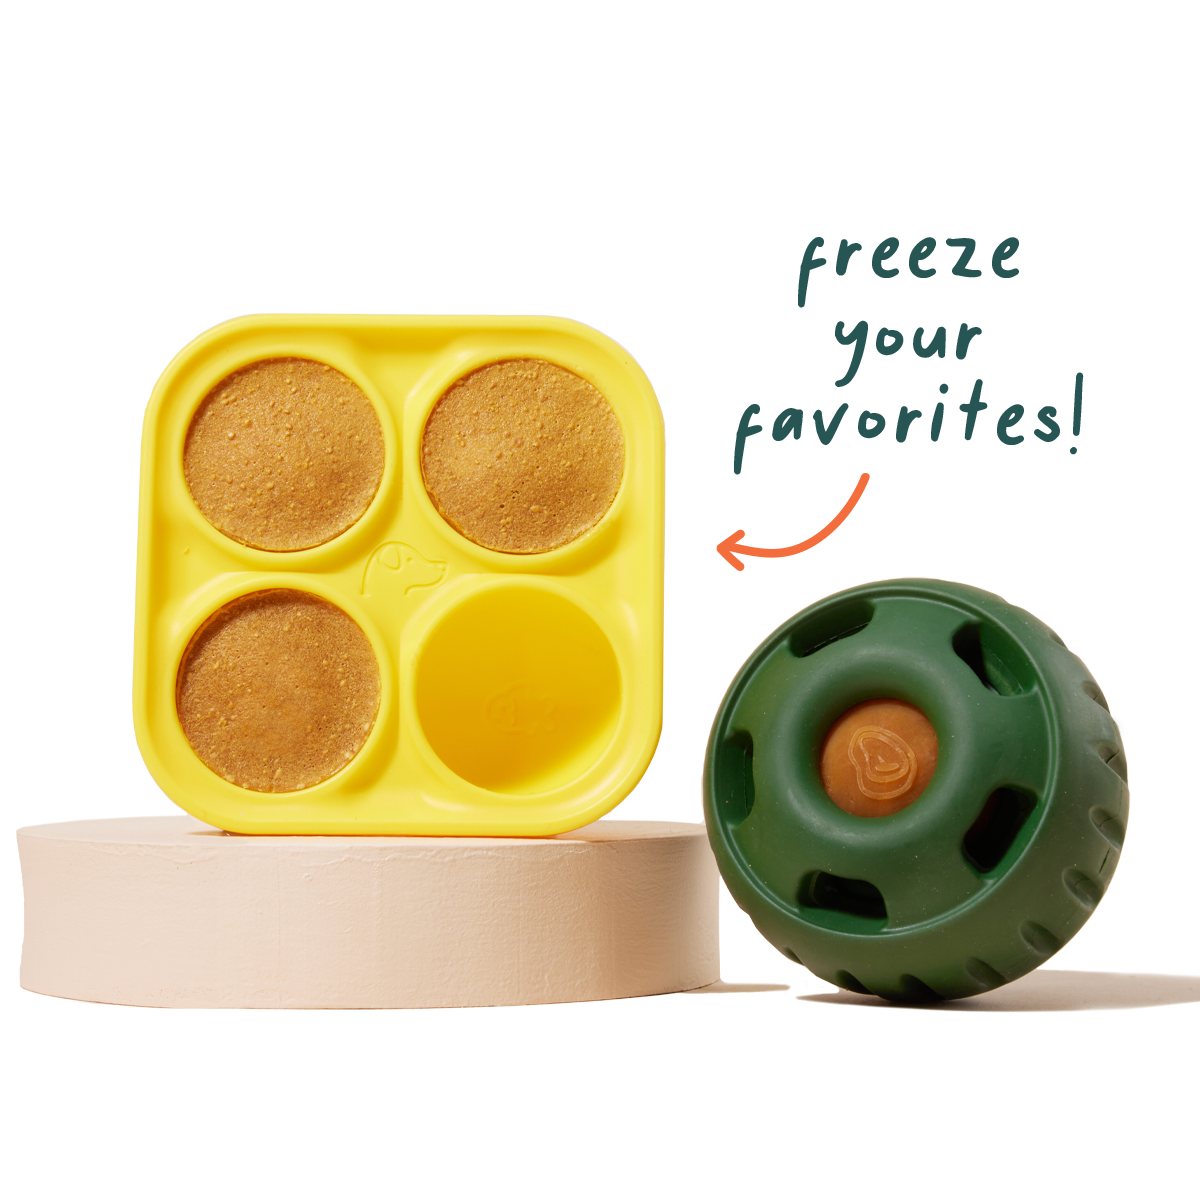 Woof - The Pupsicle Enrichment Dog Toy + Treat Mold